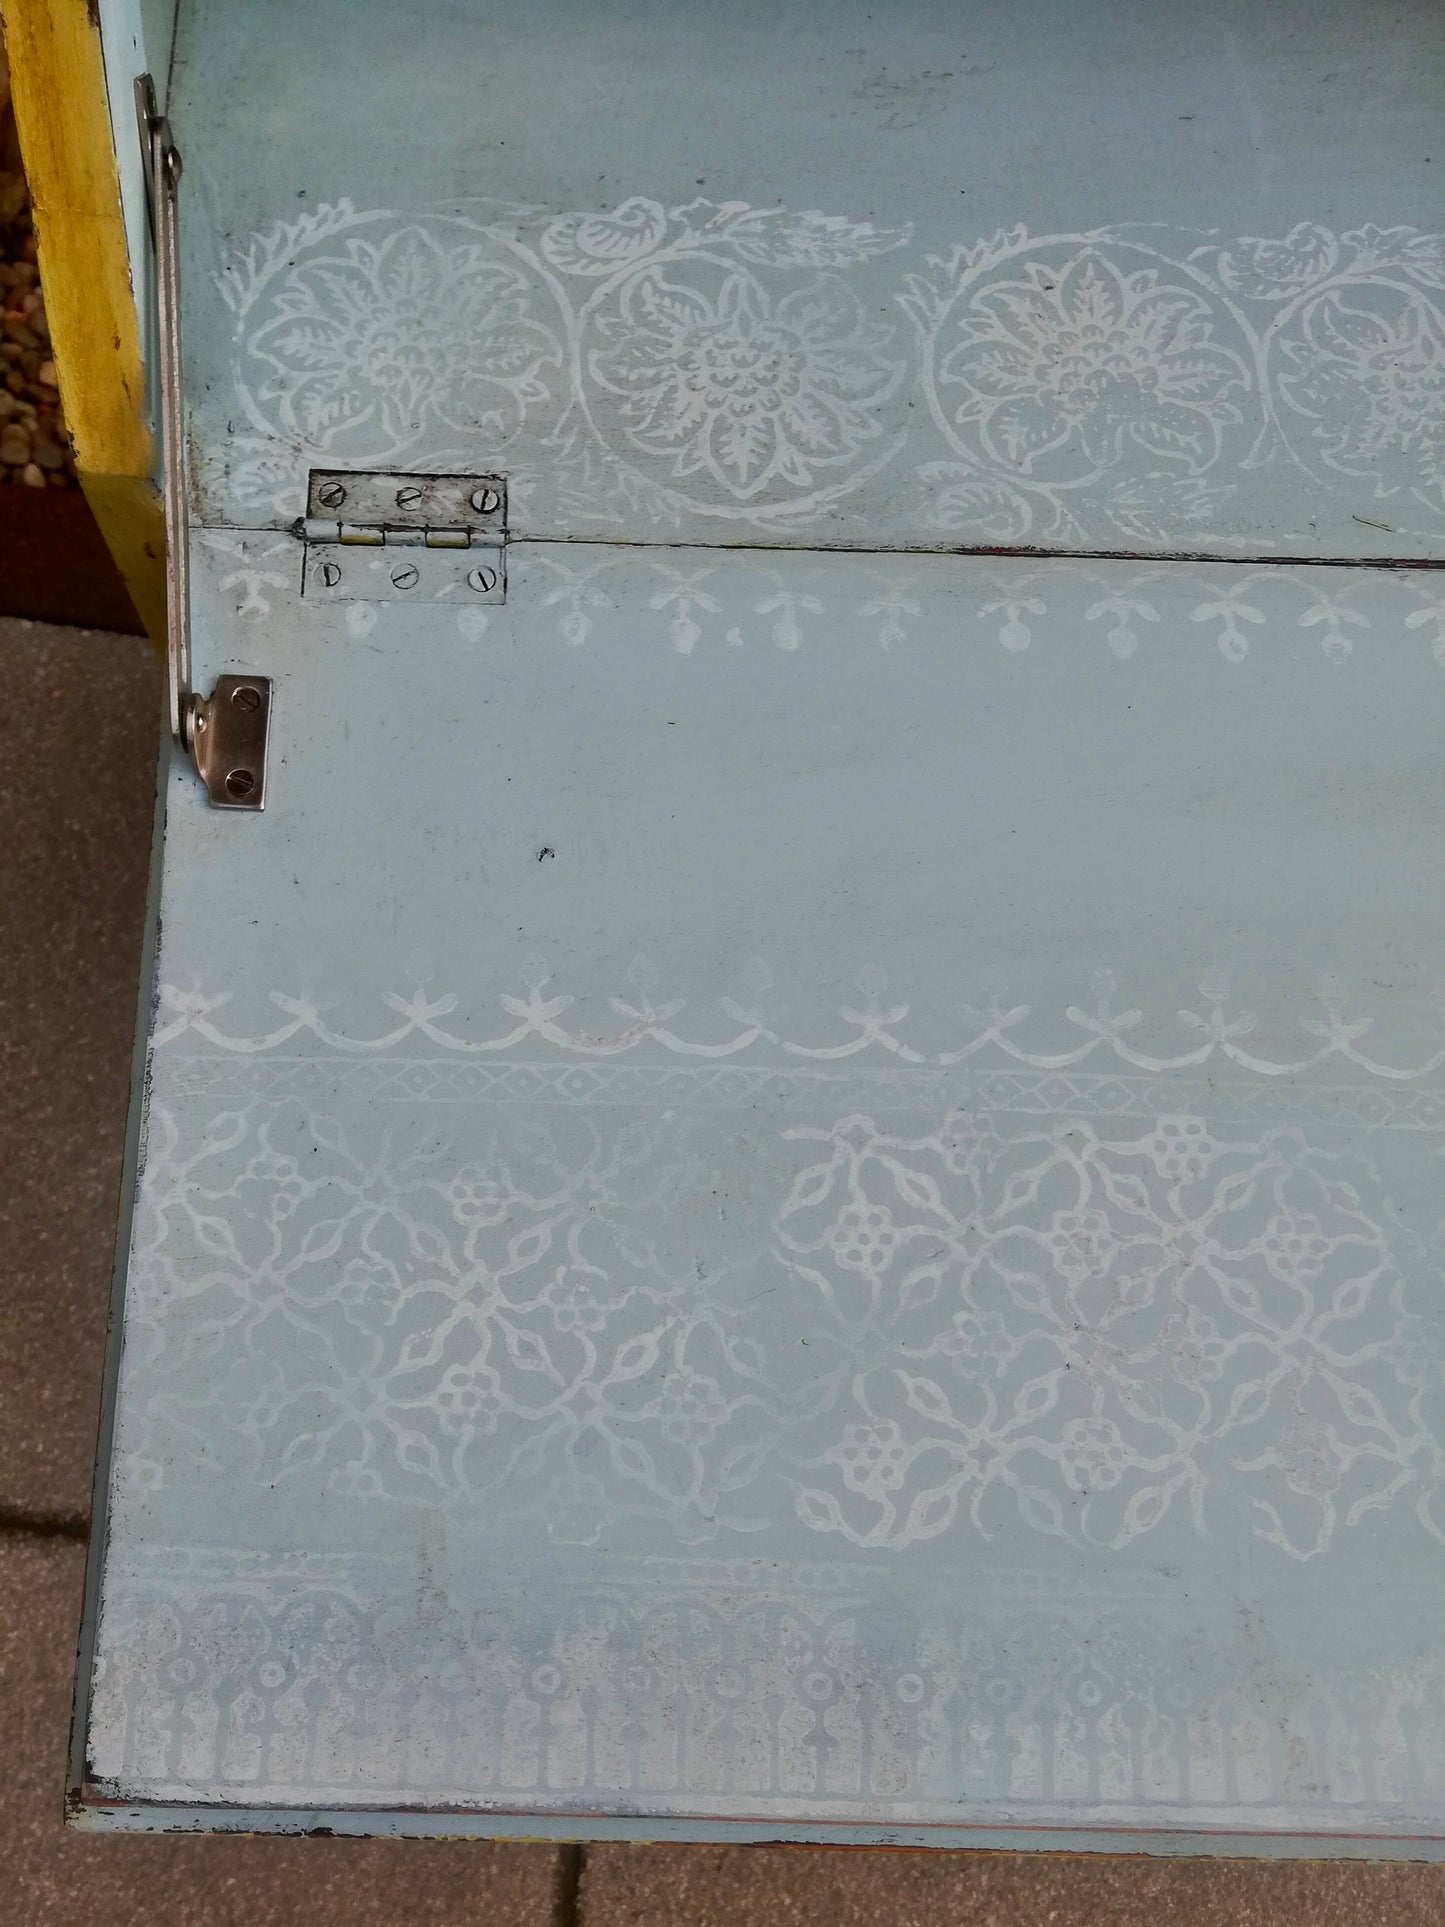 Vintage writing bureau painted in soft creamy yellow and antique waxed to finish